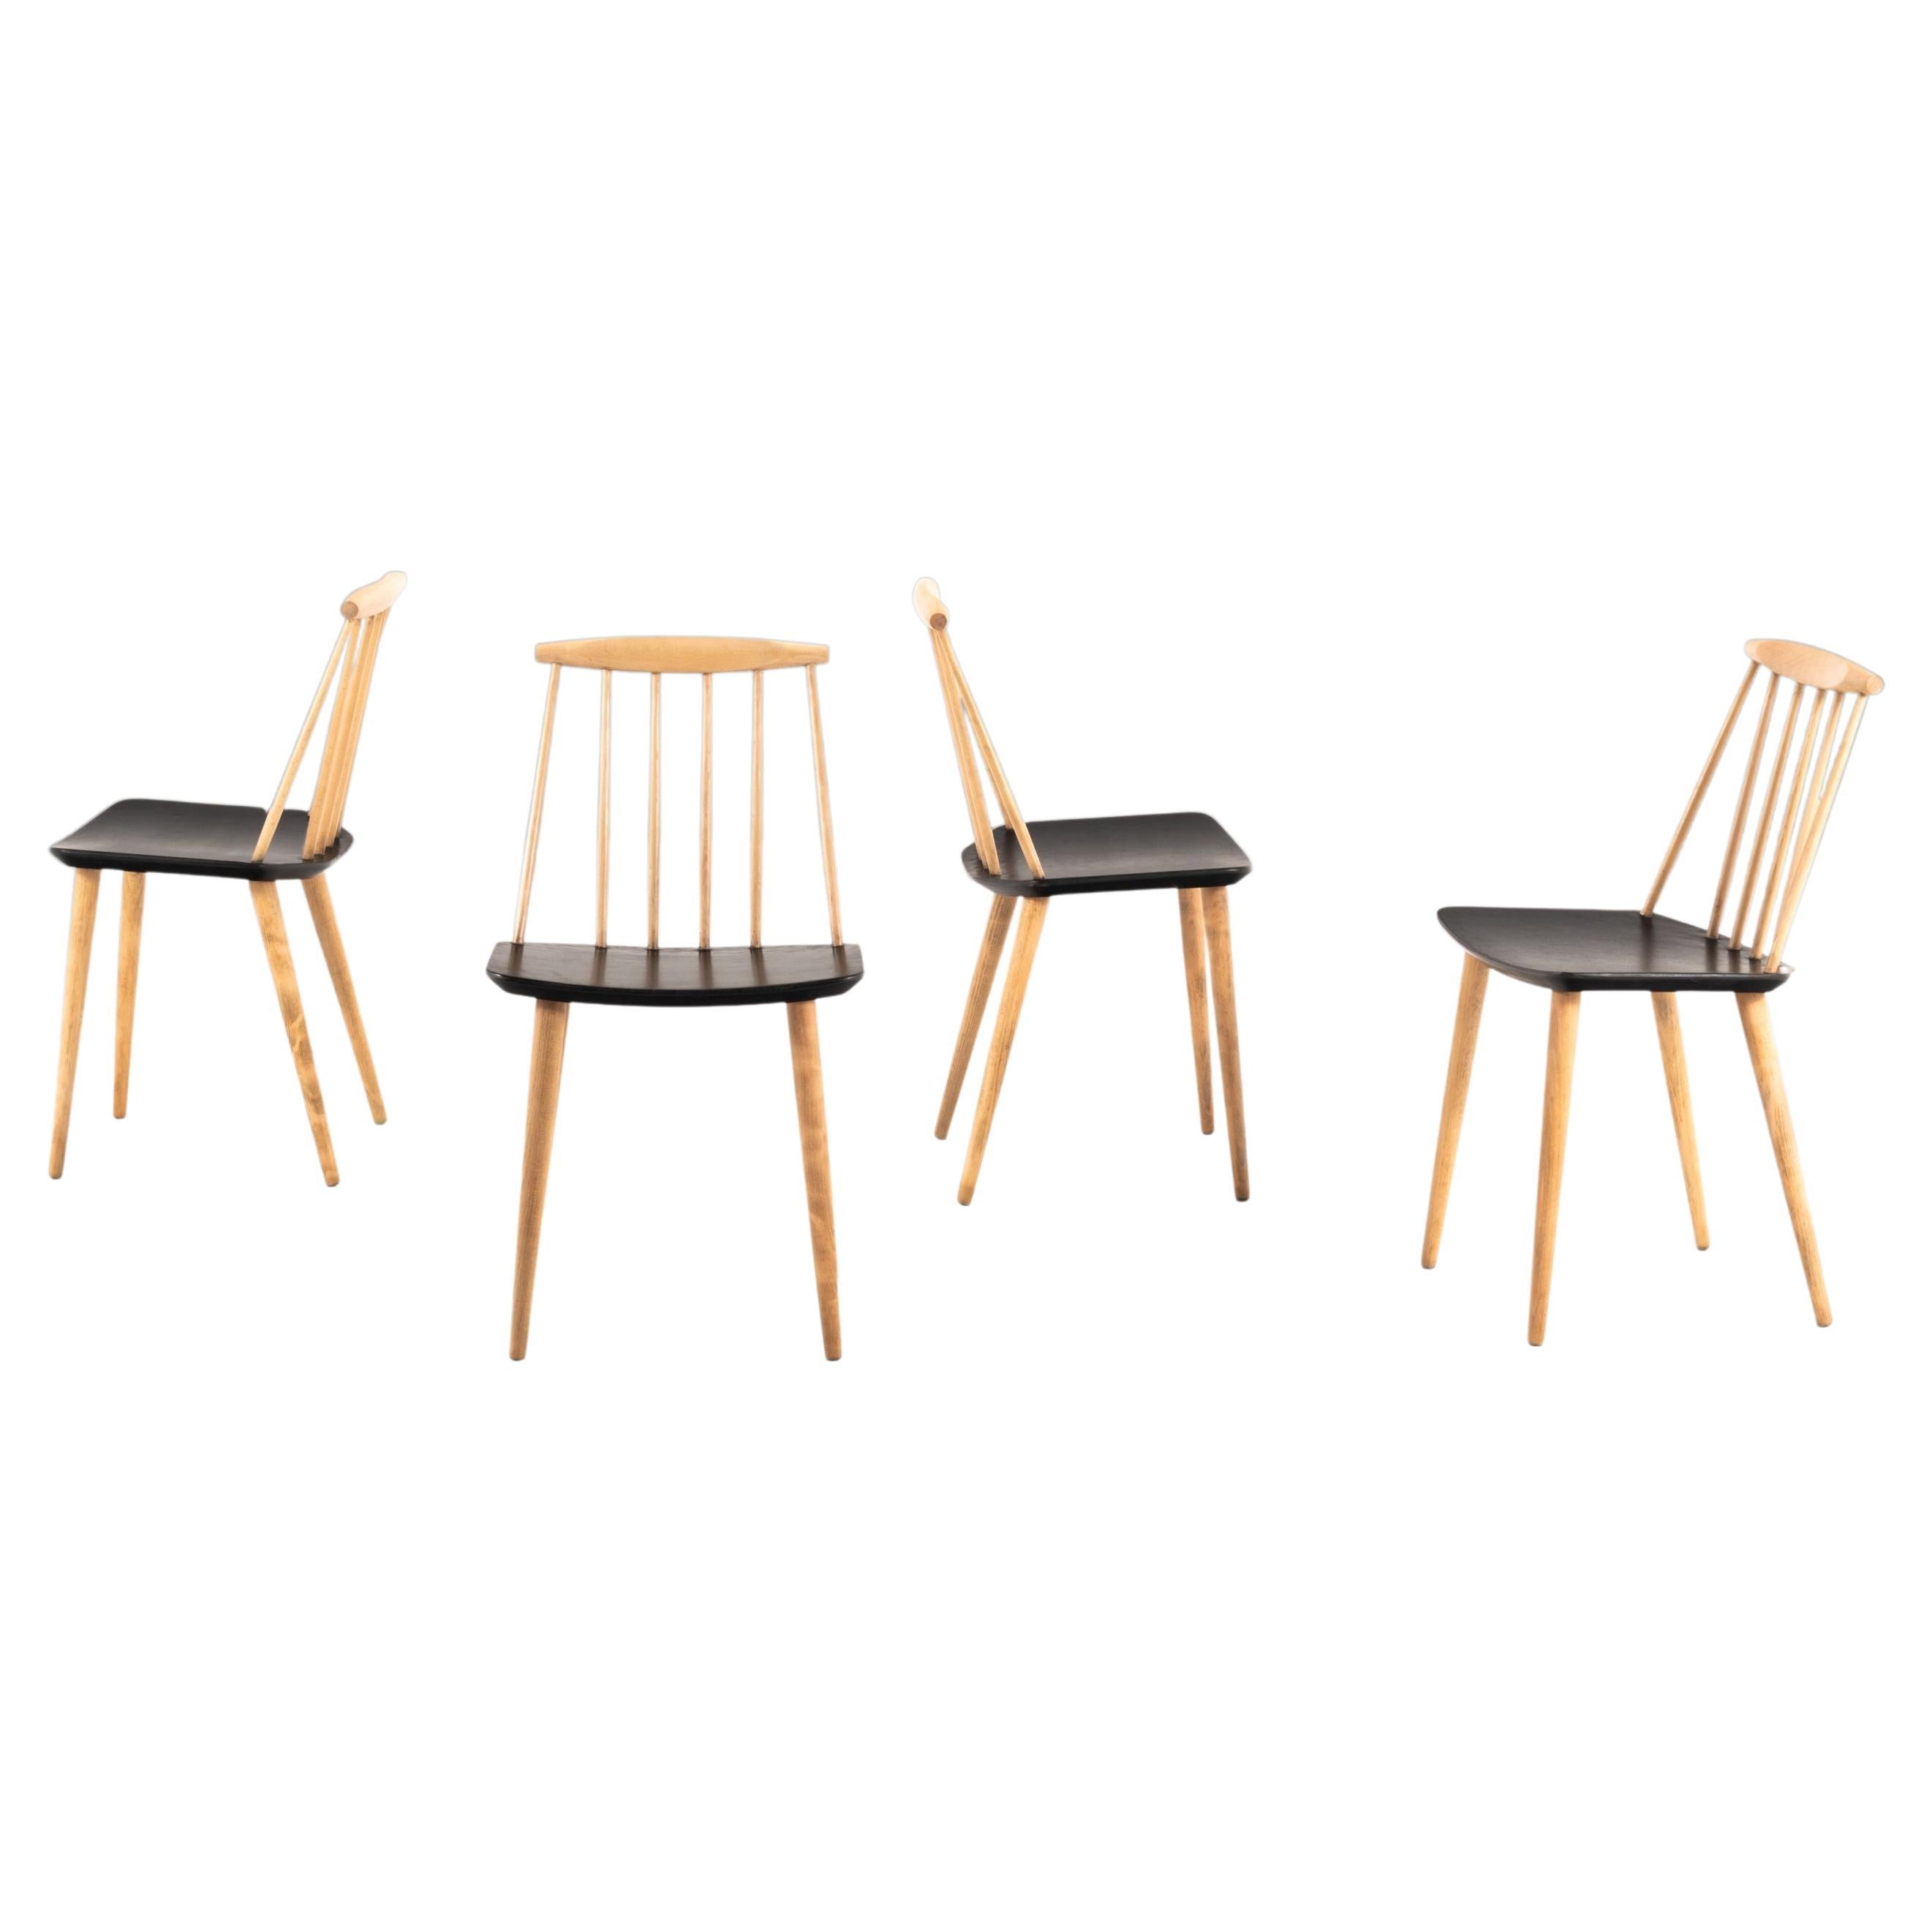 Set of 4 Model J 77 'Farmhouse' Chairs in Beech by Folke Palsson for FDB, 1960's